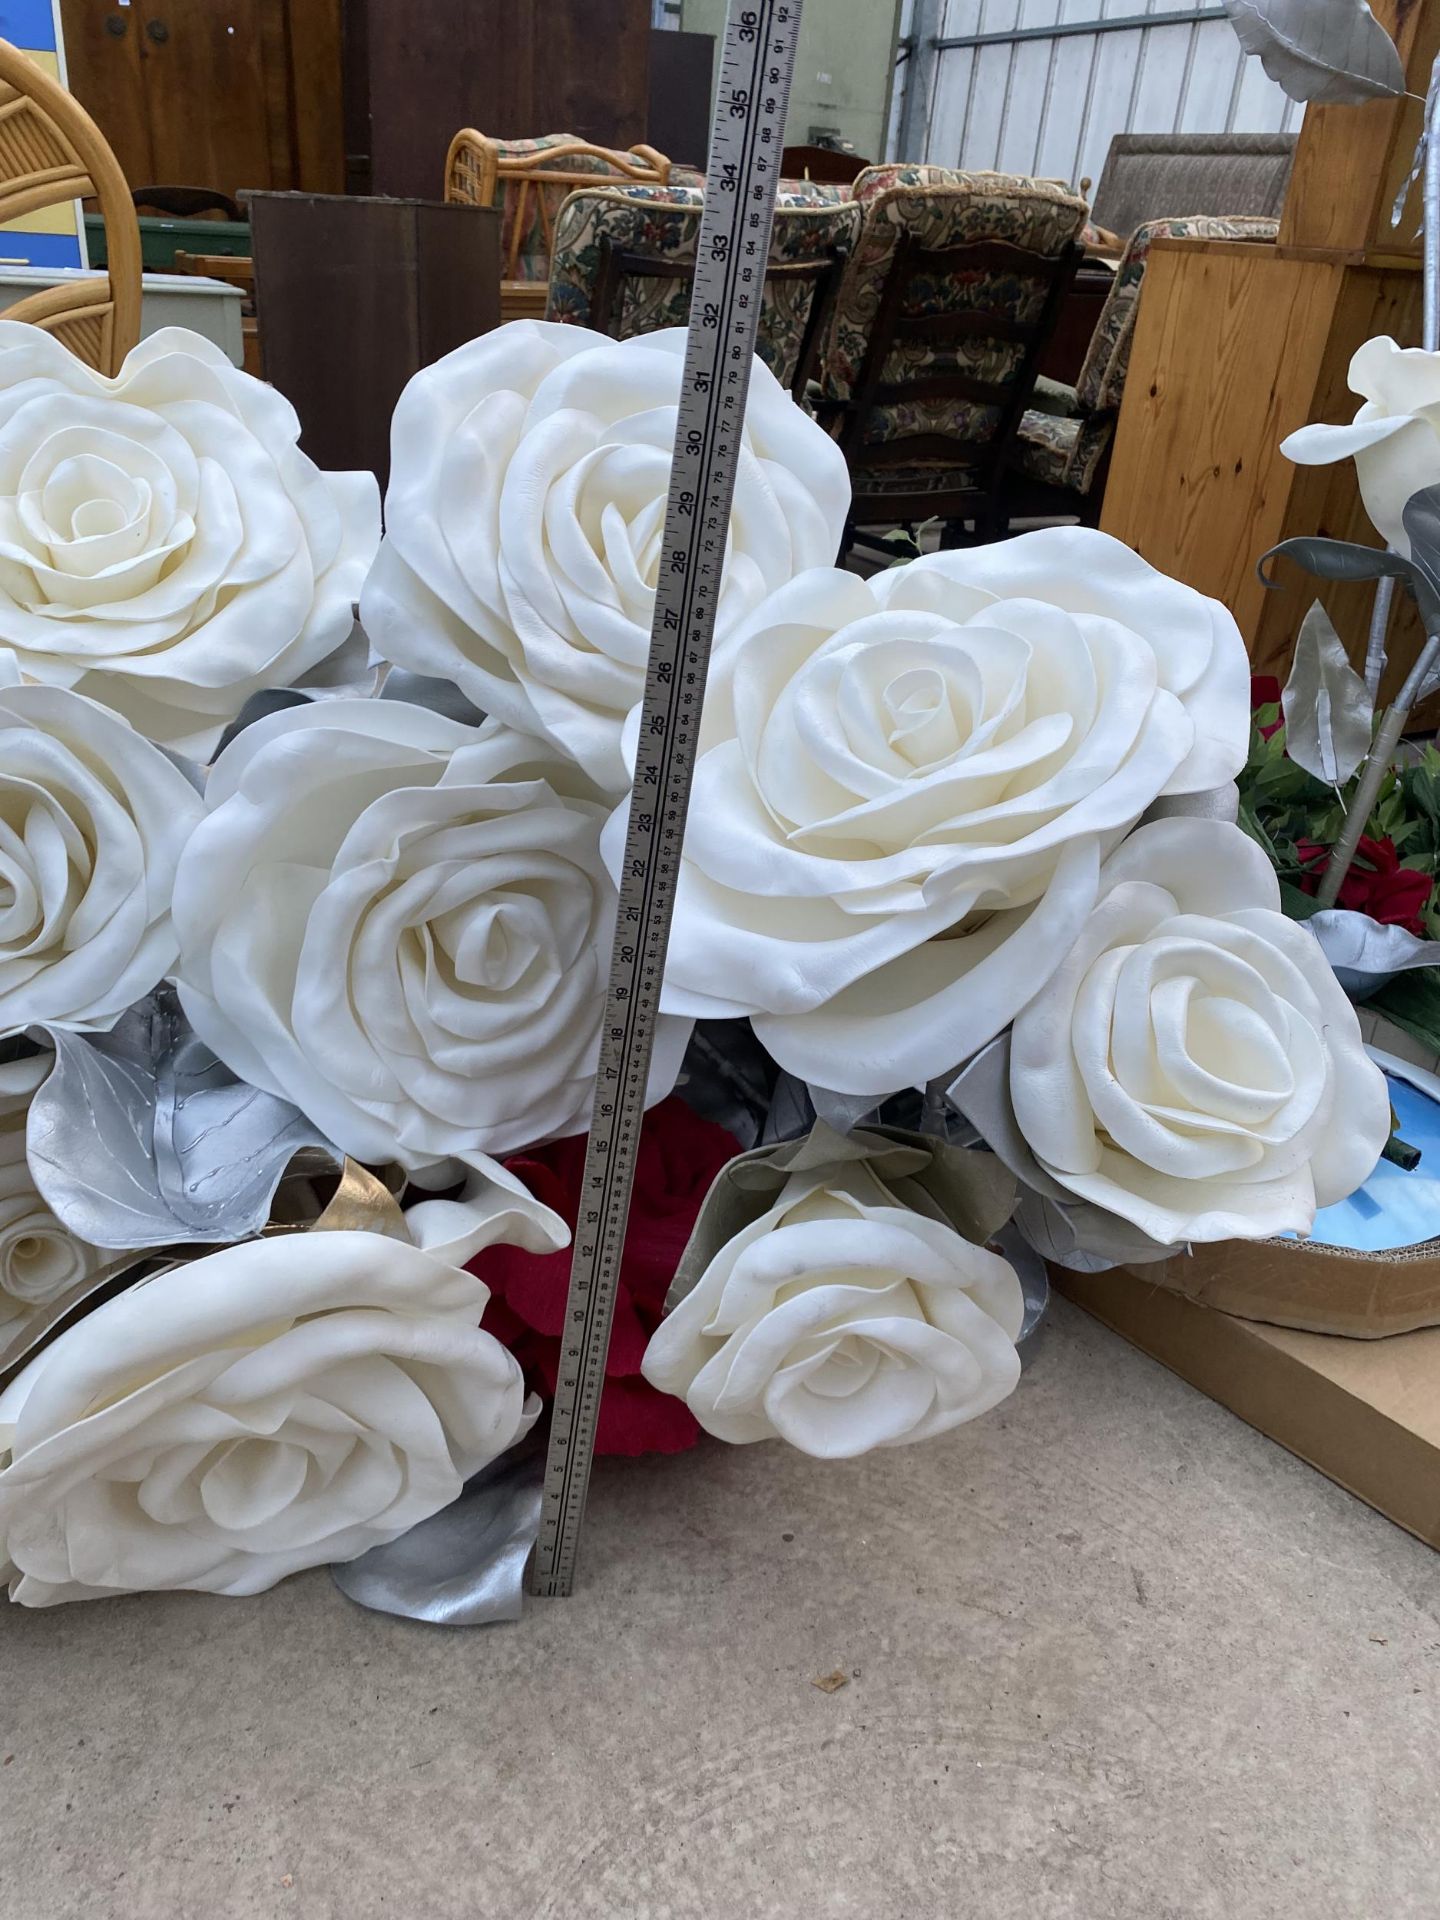 A LARGE QUANTITY OF ARTIFICIAL WEDDING FLOWERS AND DECORATIONS - Image 10 of 10